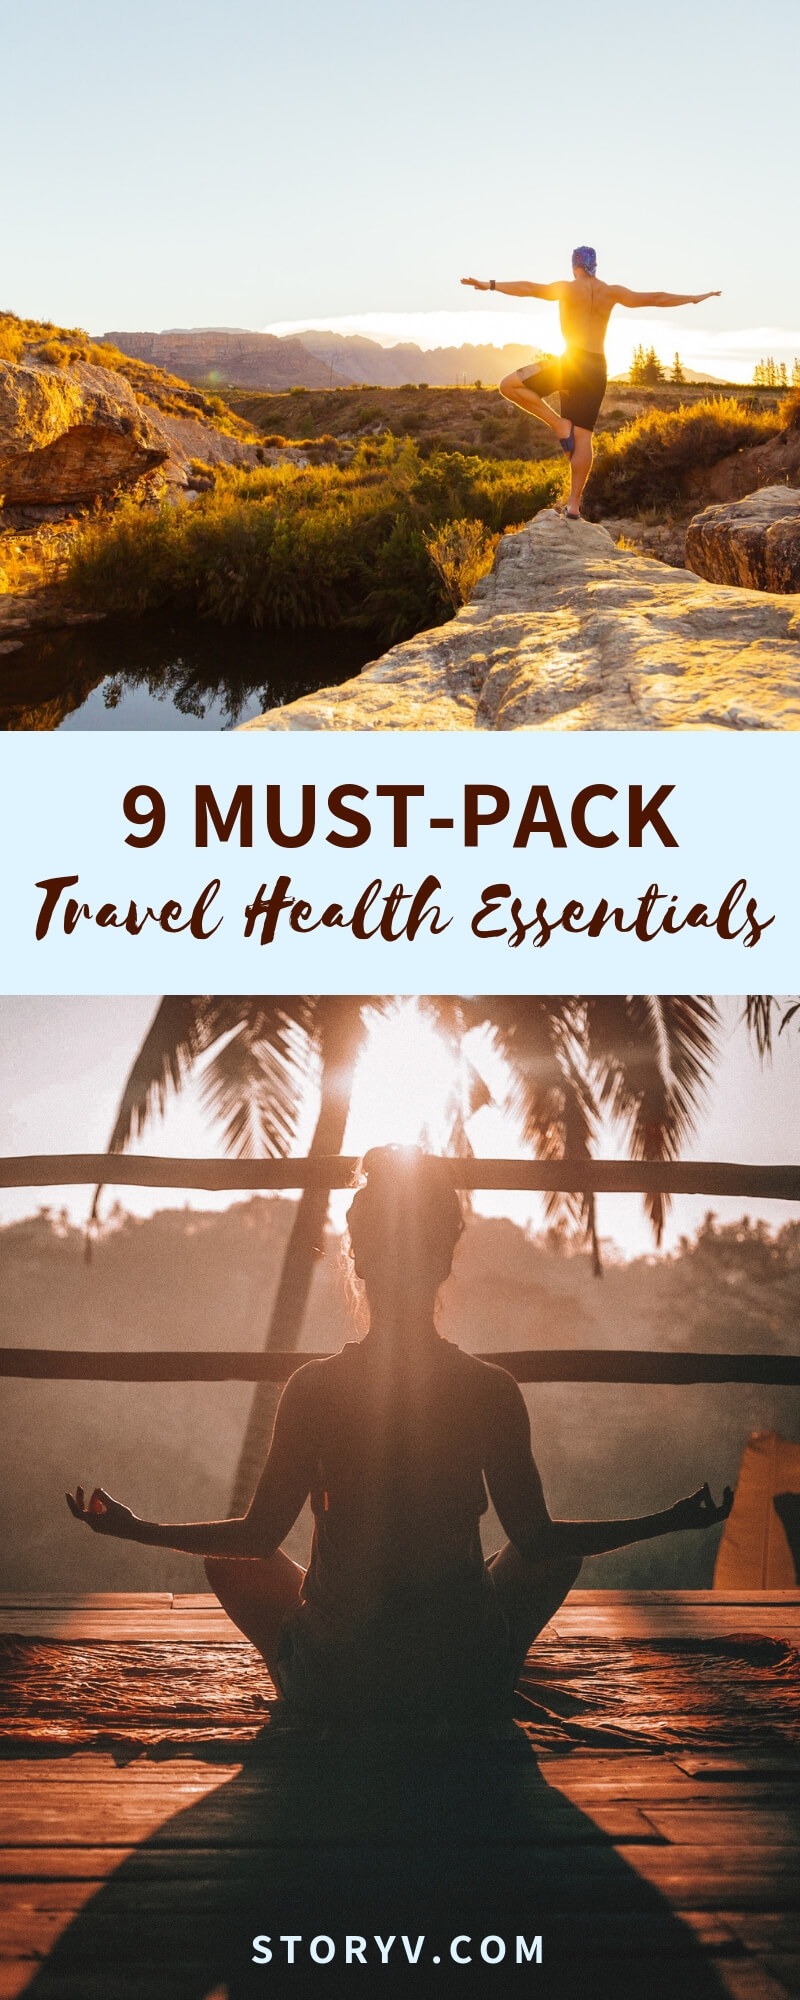 Stay healthy while traveling by putting these 9 travel health essentials on your packing list. Don't travel abroad without them!